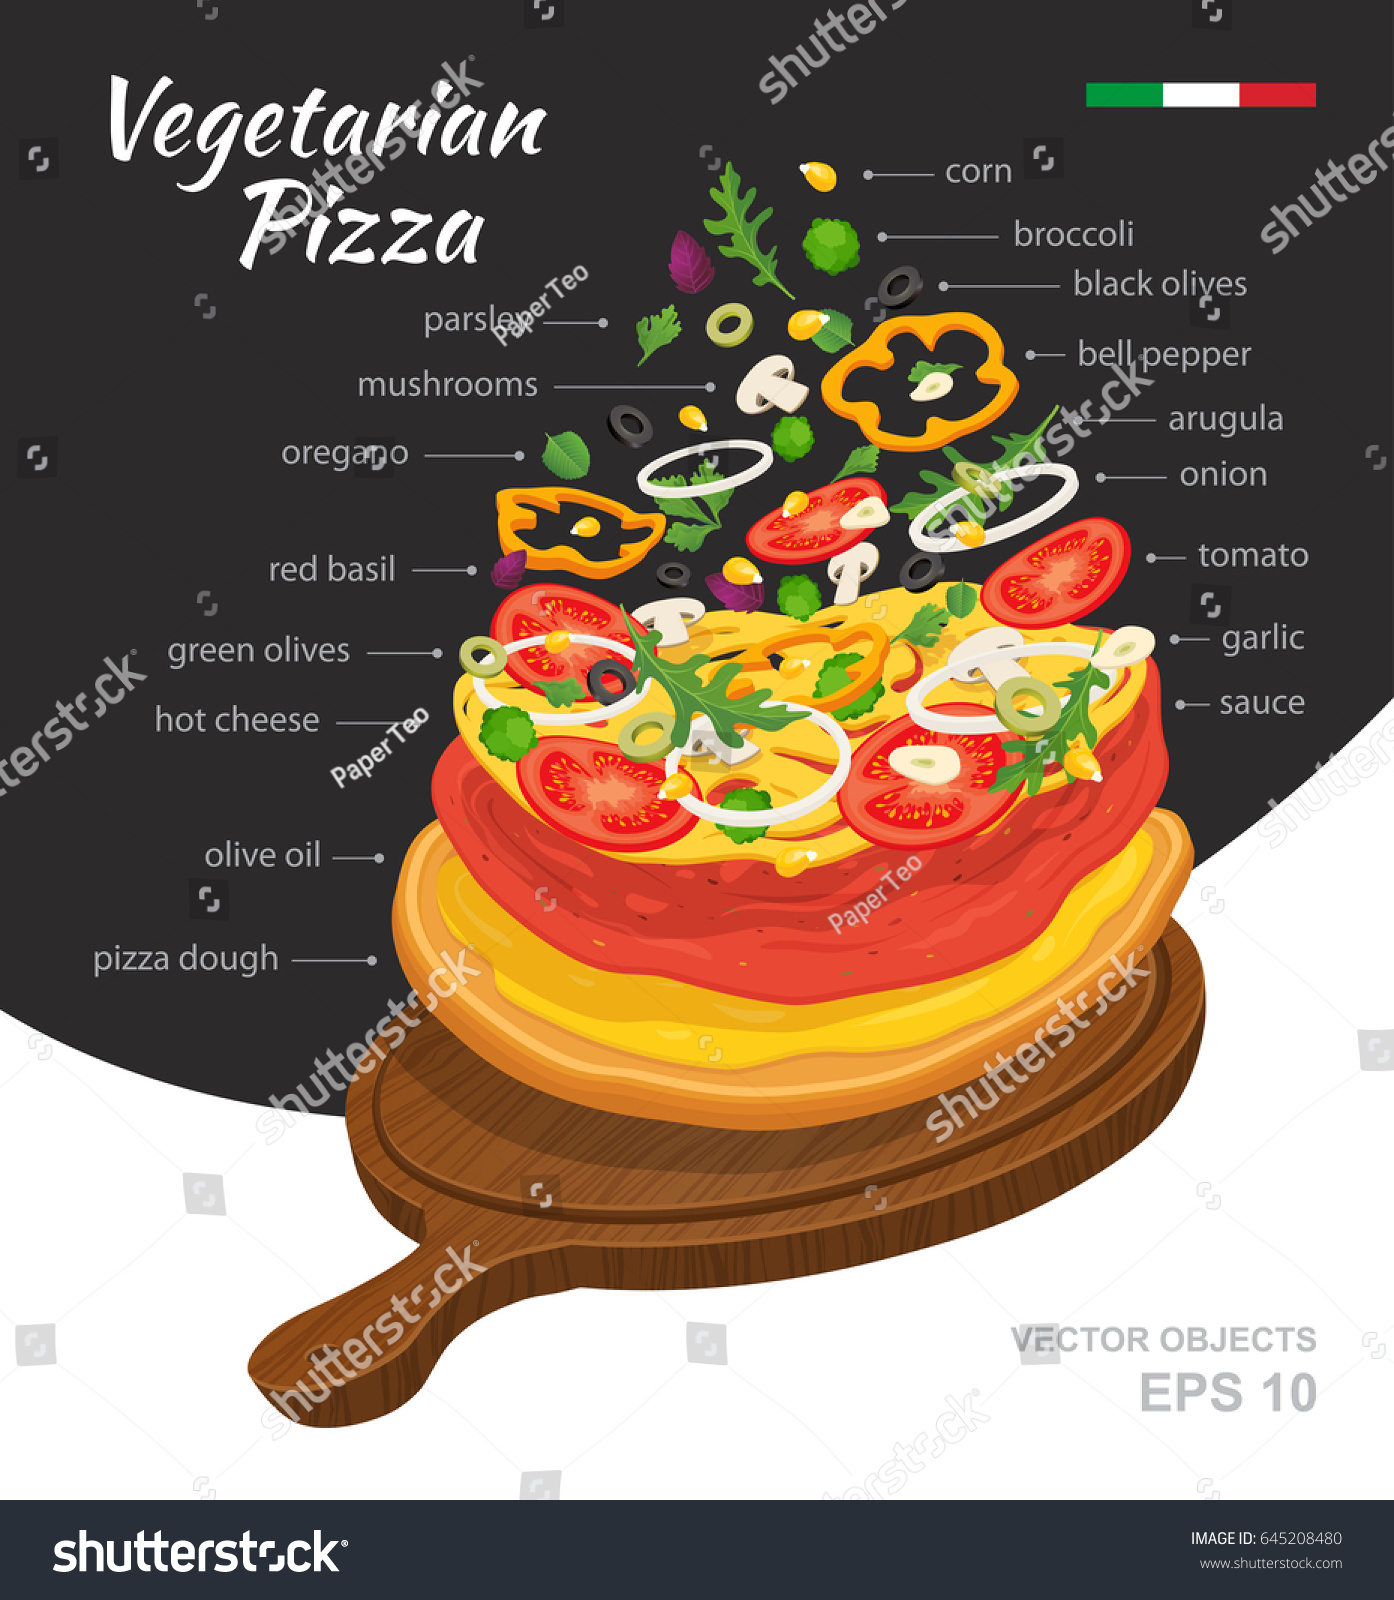 Vector  illustration of hot Vegetarian Pizza on wooden board. Falling ingredients. Traditional Italian recipe. Infographic creative design. Fastfood isolated on black and white background #645208480